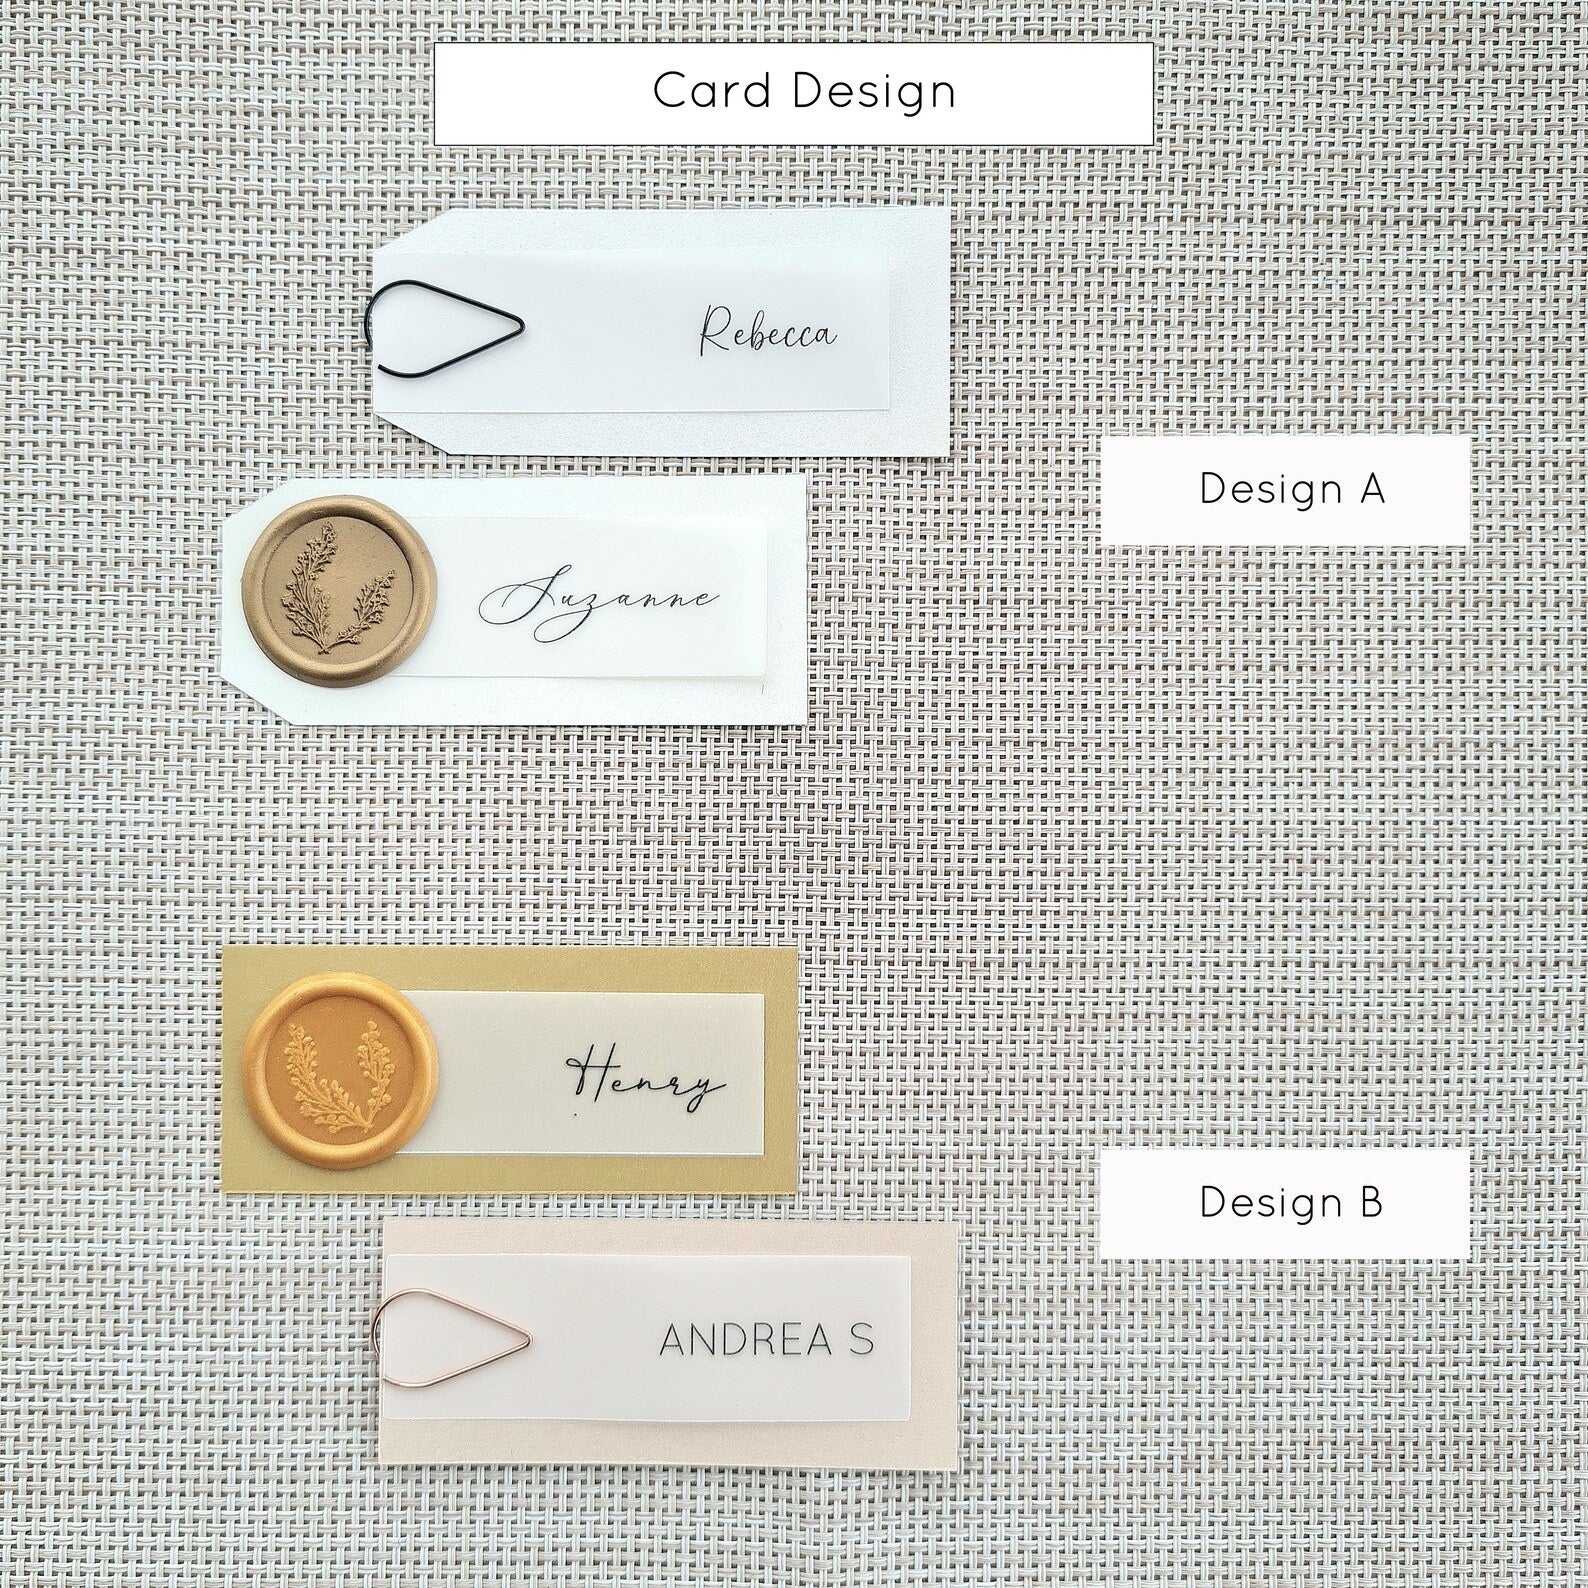 Select Your Place Card Design | Cornered or Tapered